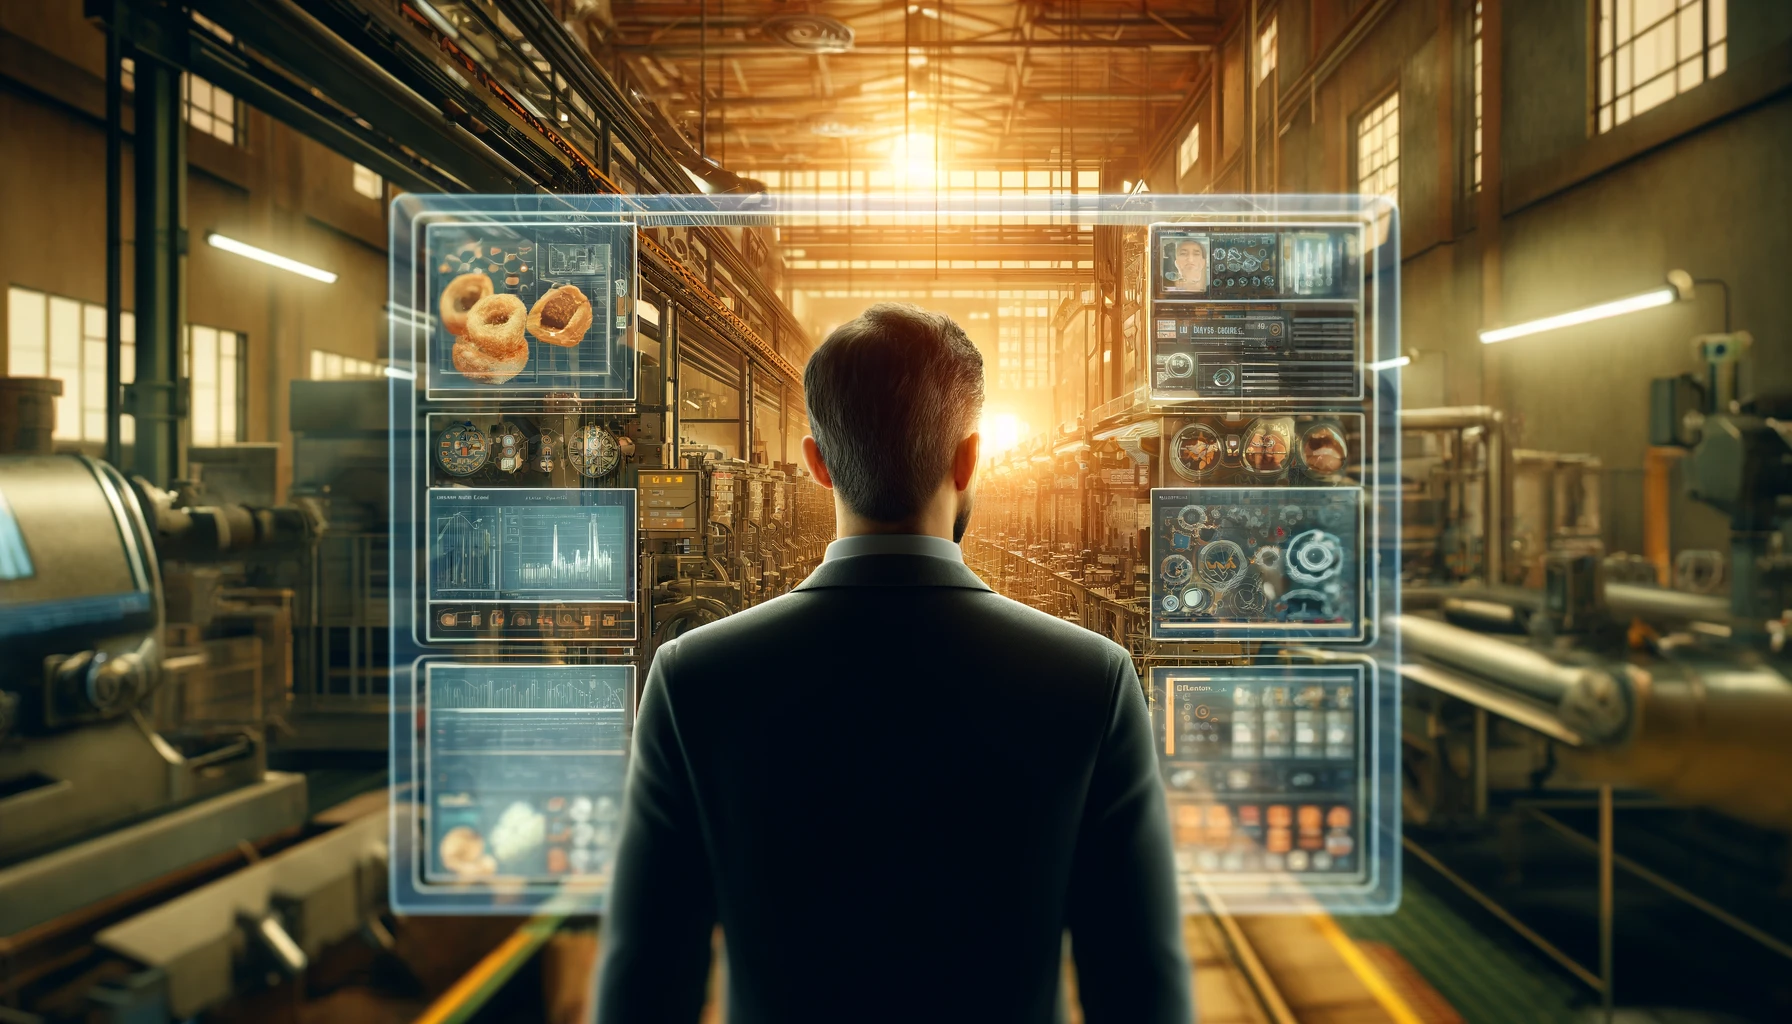 Here is a new illustration where the quality control specialist is facing forward, interacting with an AI-powered system in a food and beverage factory. The specialist is examining data on multiple monitors, and the factory setting is rendered with a blend of warm and cool tones. The focus is on the specialist's face, highlighting their engagement with the technology.